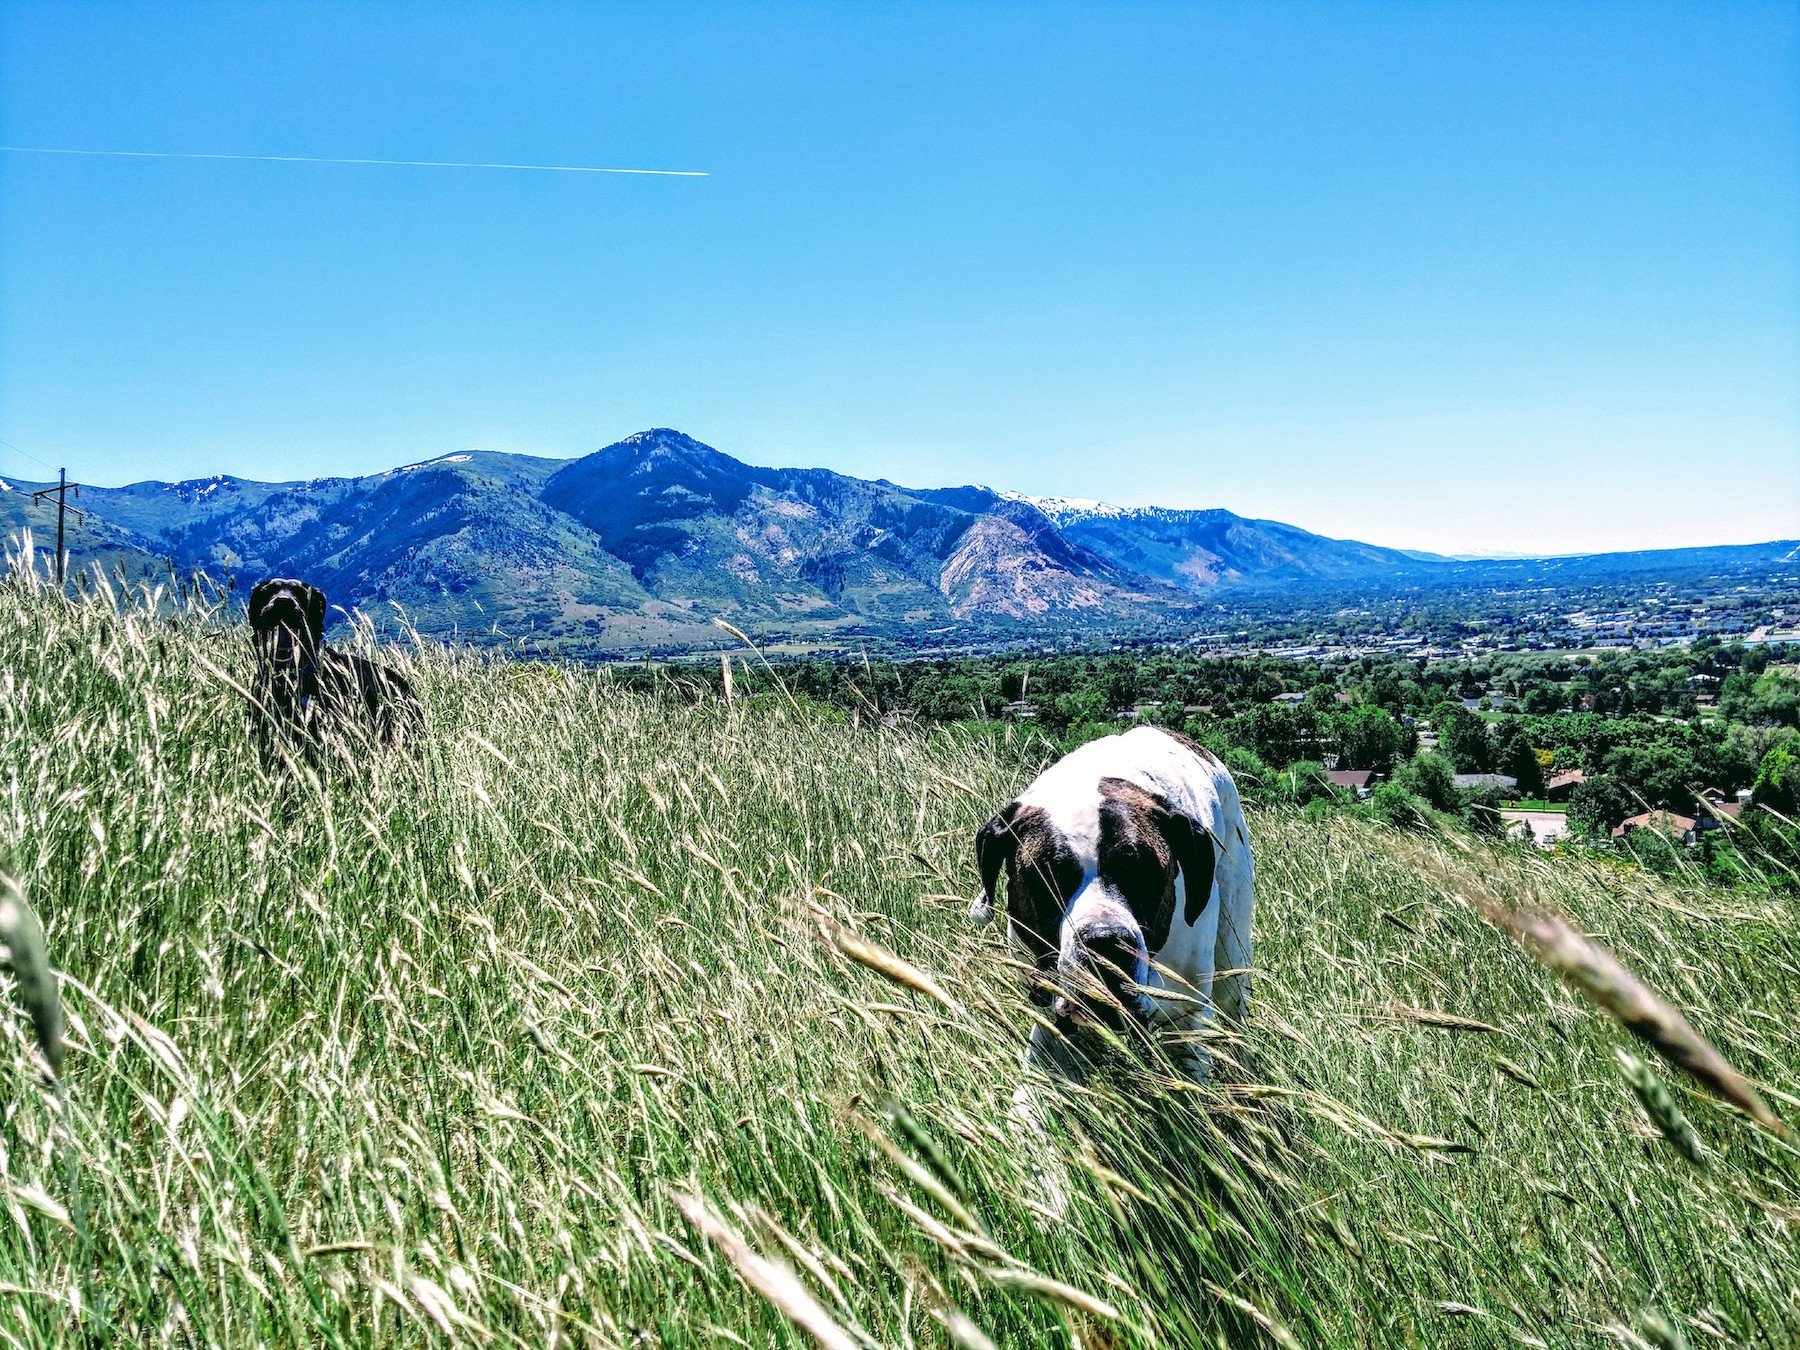 a white and brown dog is in the foreground and a black mutt is in the background in a field of long grass in the mountains on a 